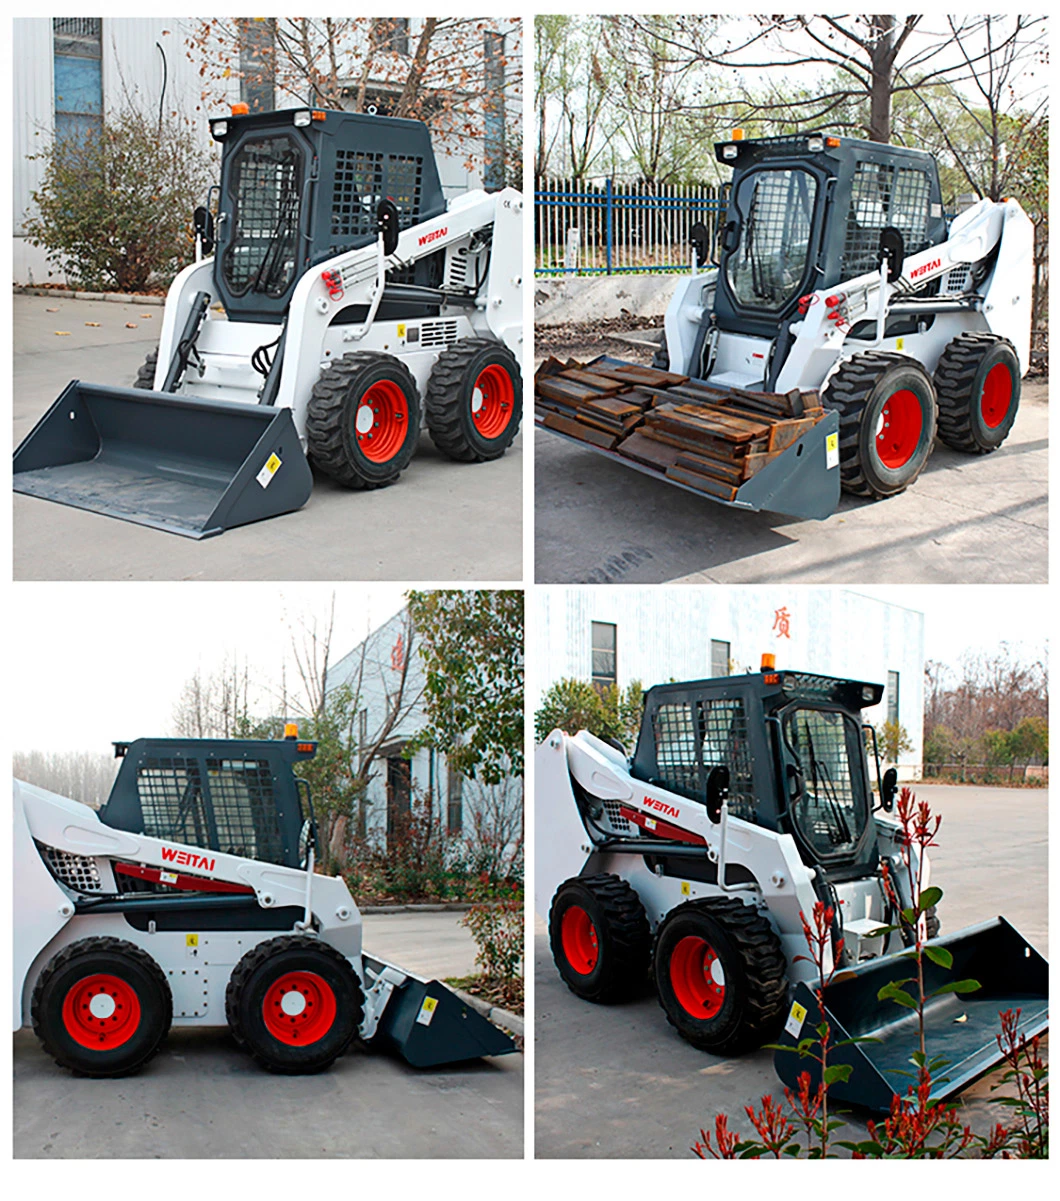 Wholesale Factory Direct Supply Small Mini Hydraulic Skid Steer Loader with Various Attachments 830 Kg Rated Load Wheel Loader